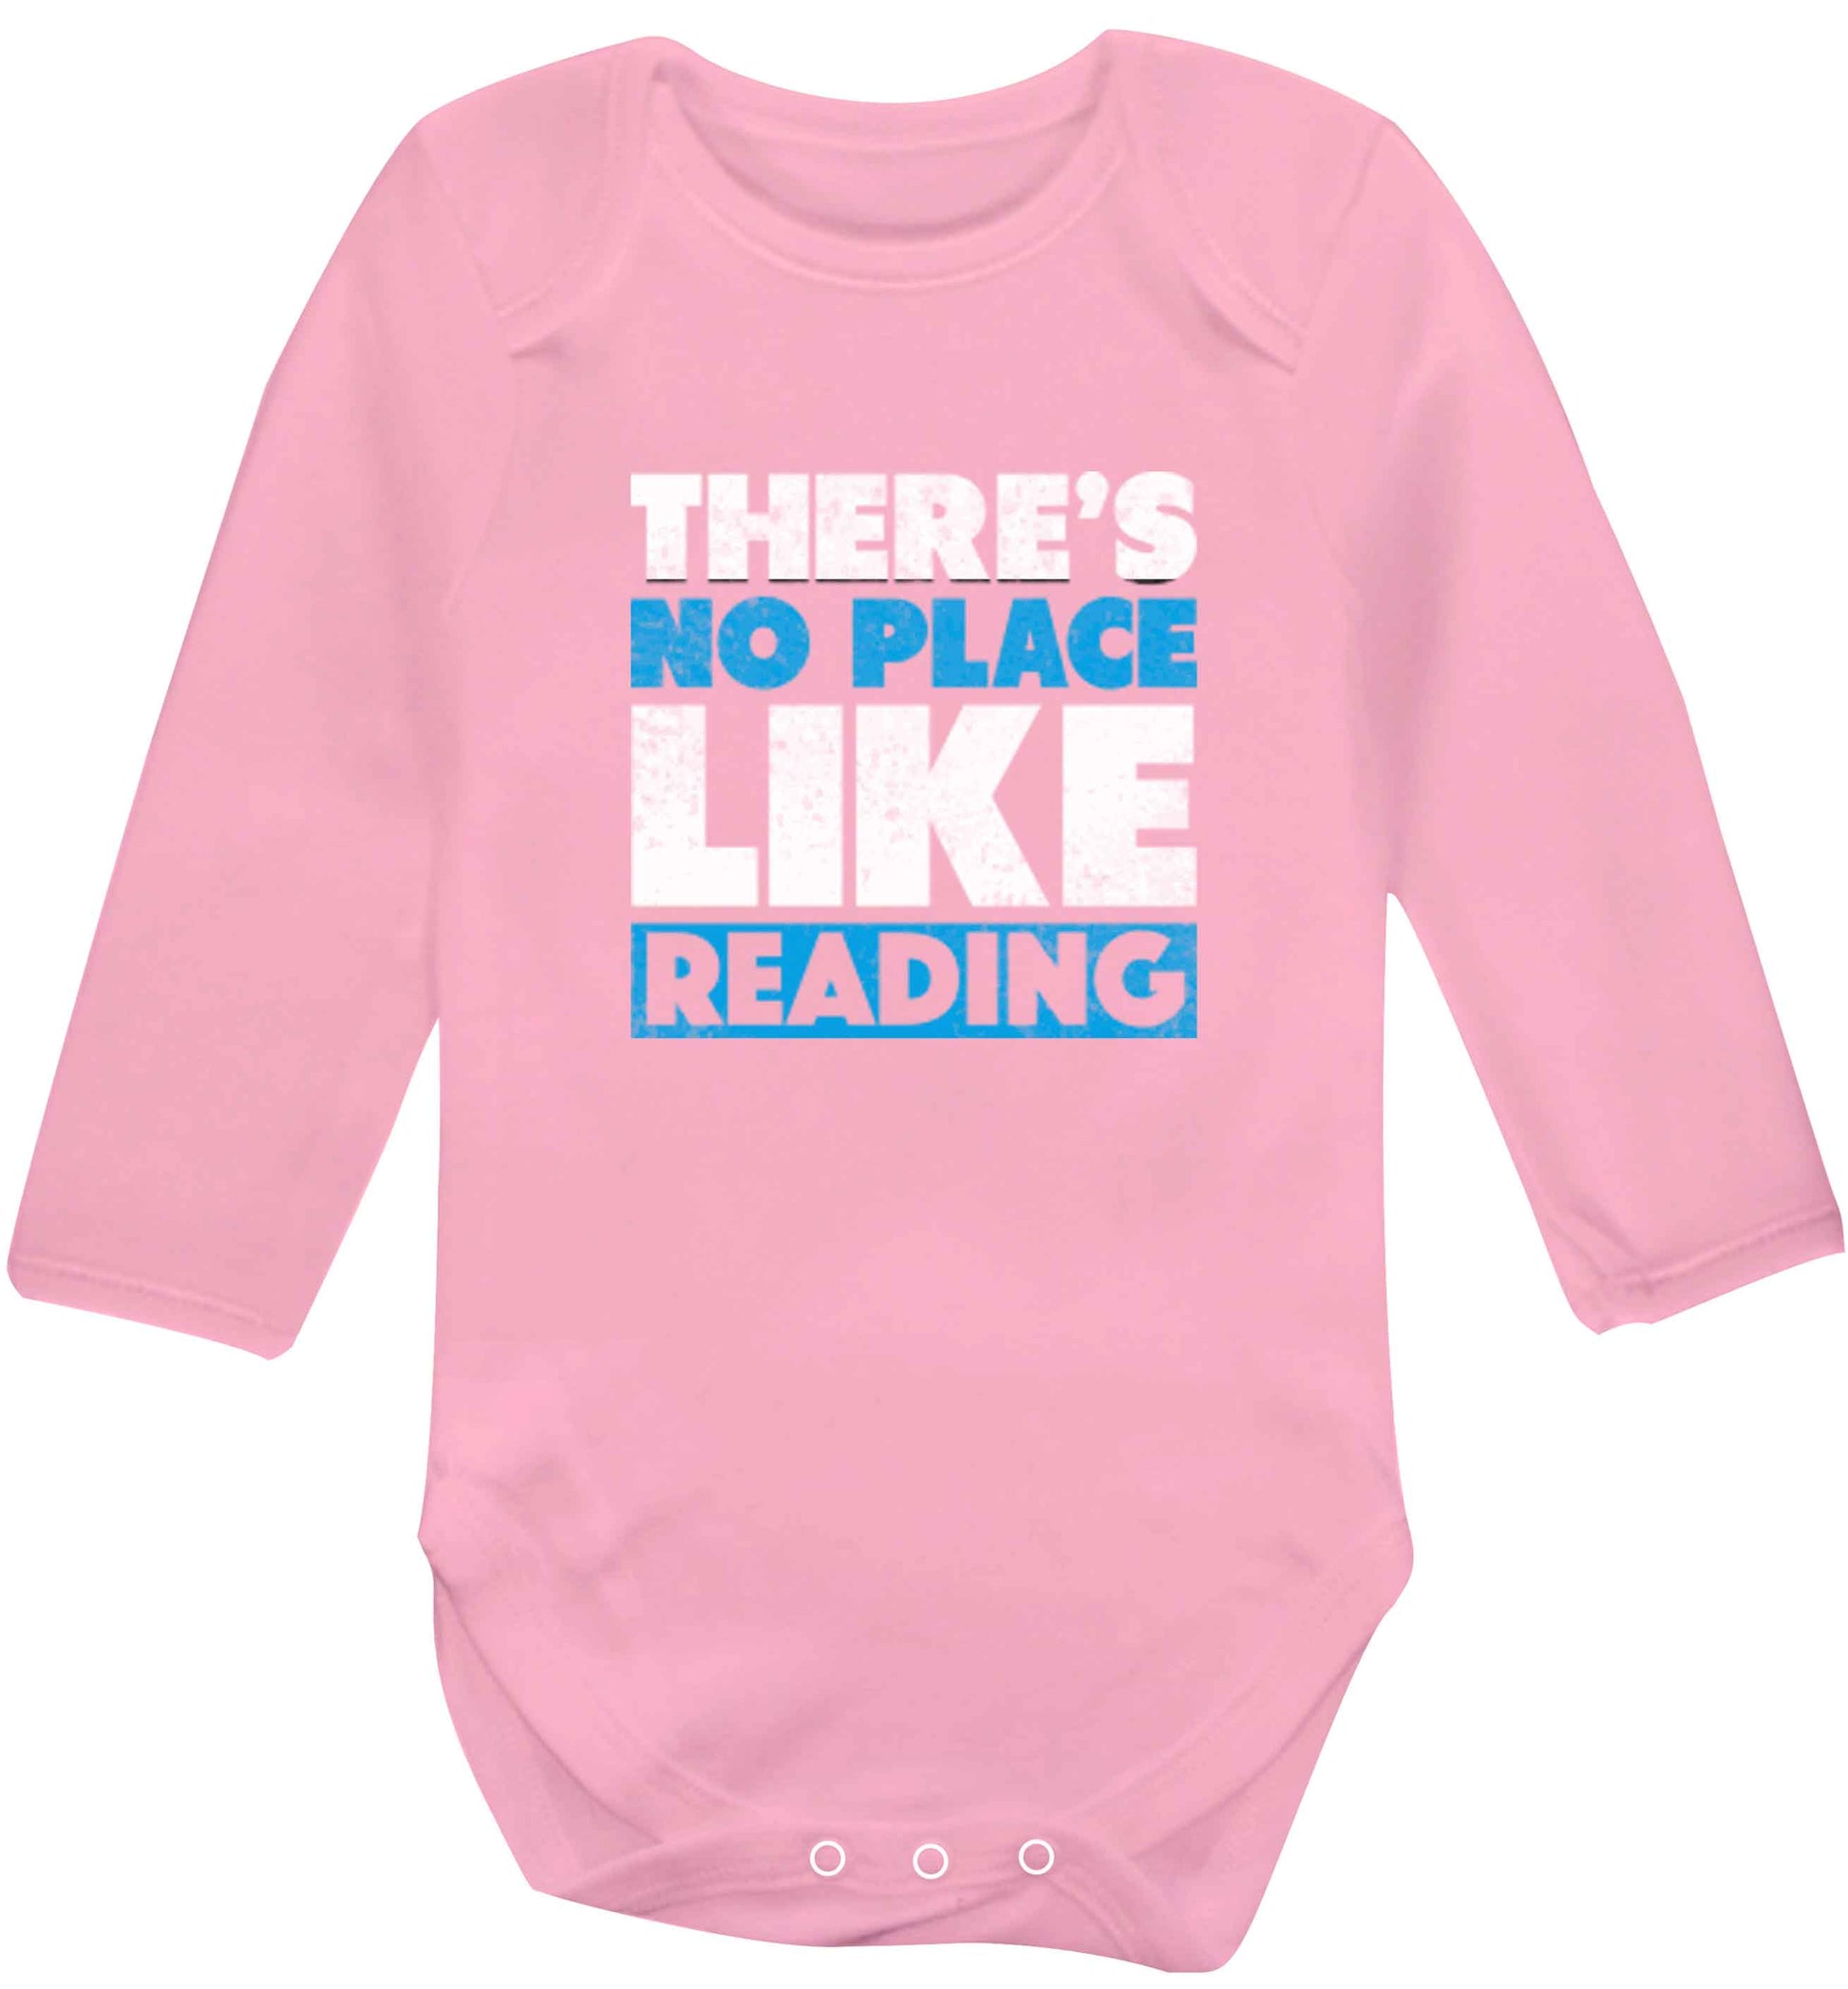 There's no place like Readingbaby vest long sleeved pale pink 6-12 months